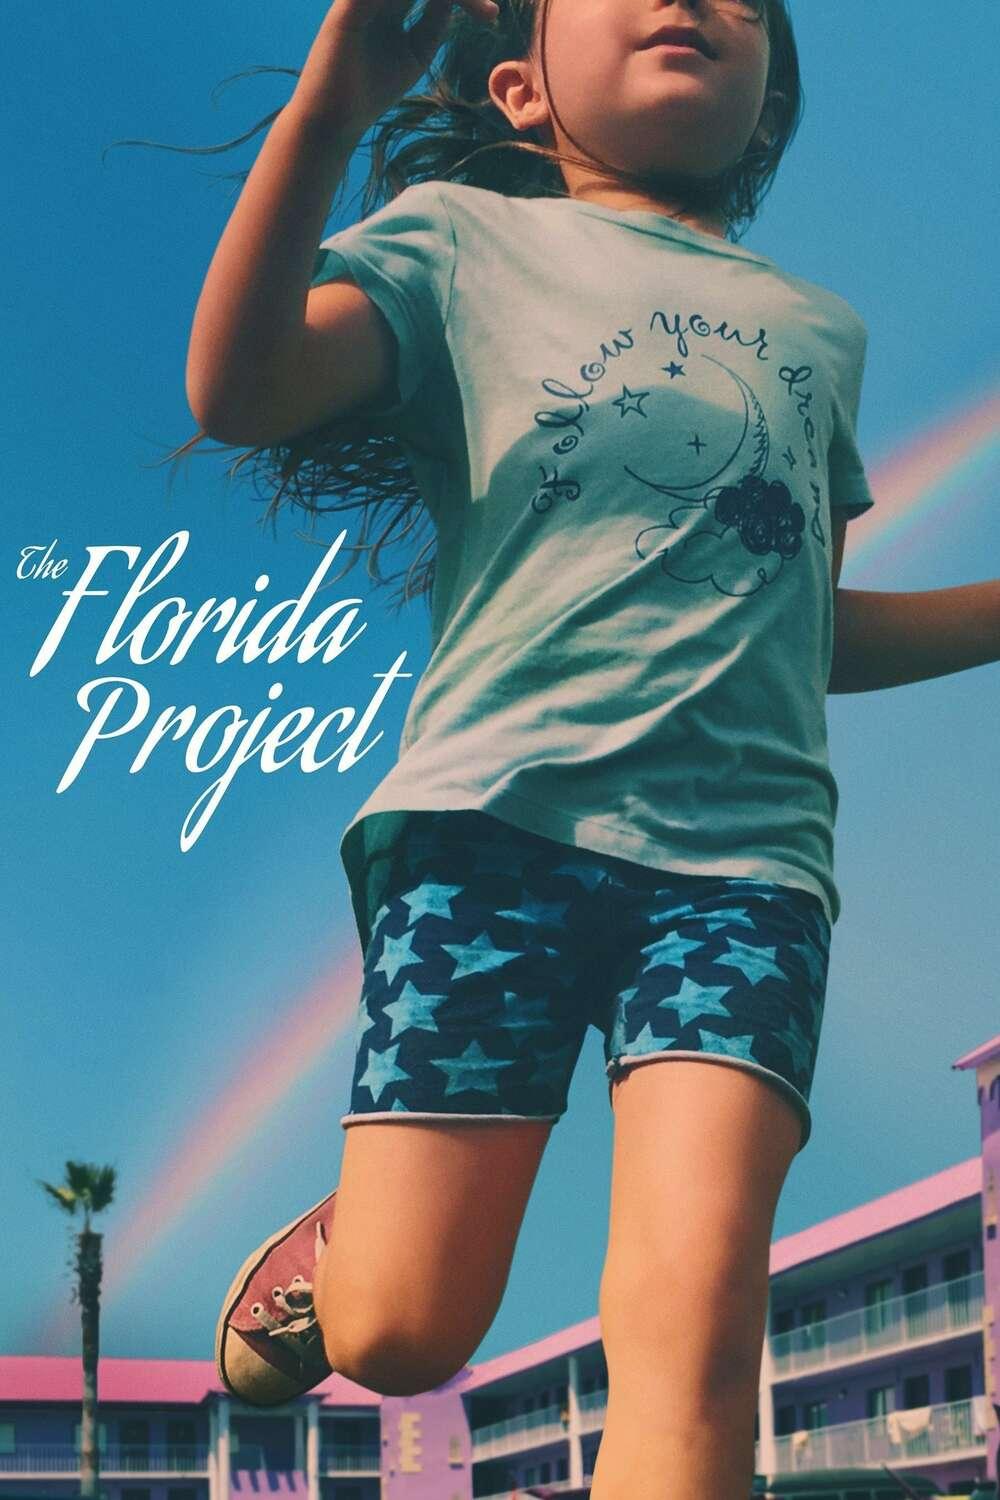 /var/folders/w9/s2rs_qds3ls88wk7y8hxwqcr0000gn/T/com.microsoft.Word/WebArchiveCopyPasteTempFiles/328538-the-florida-project-0-1000-0-1500-crop.jpg?v=60e095aa65